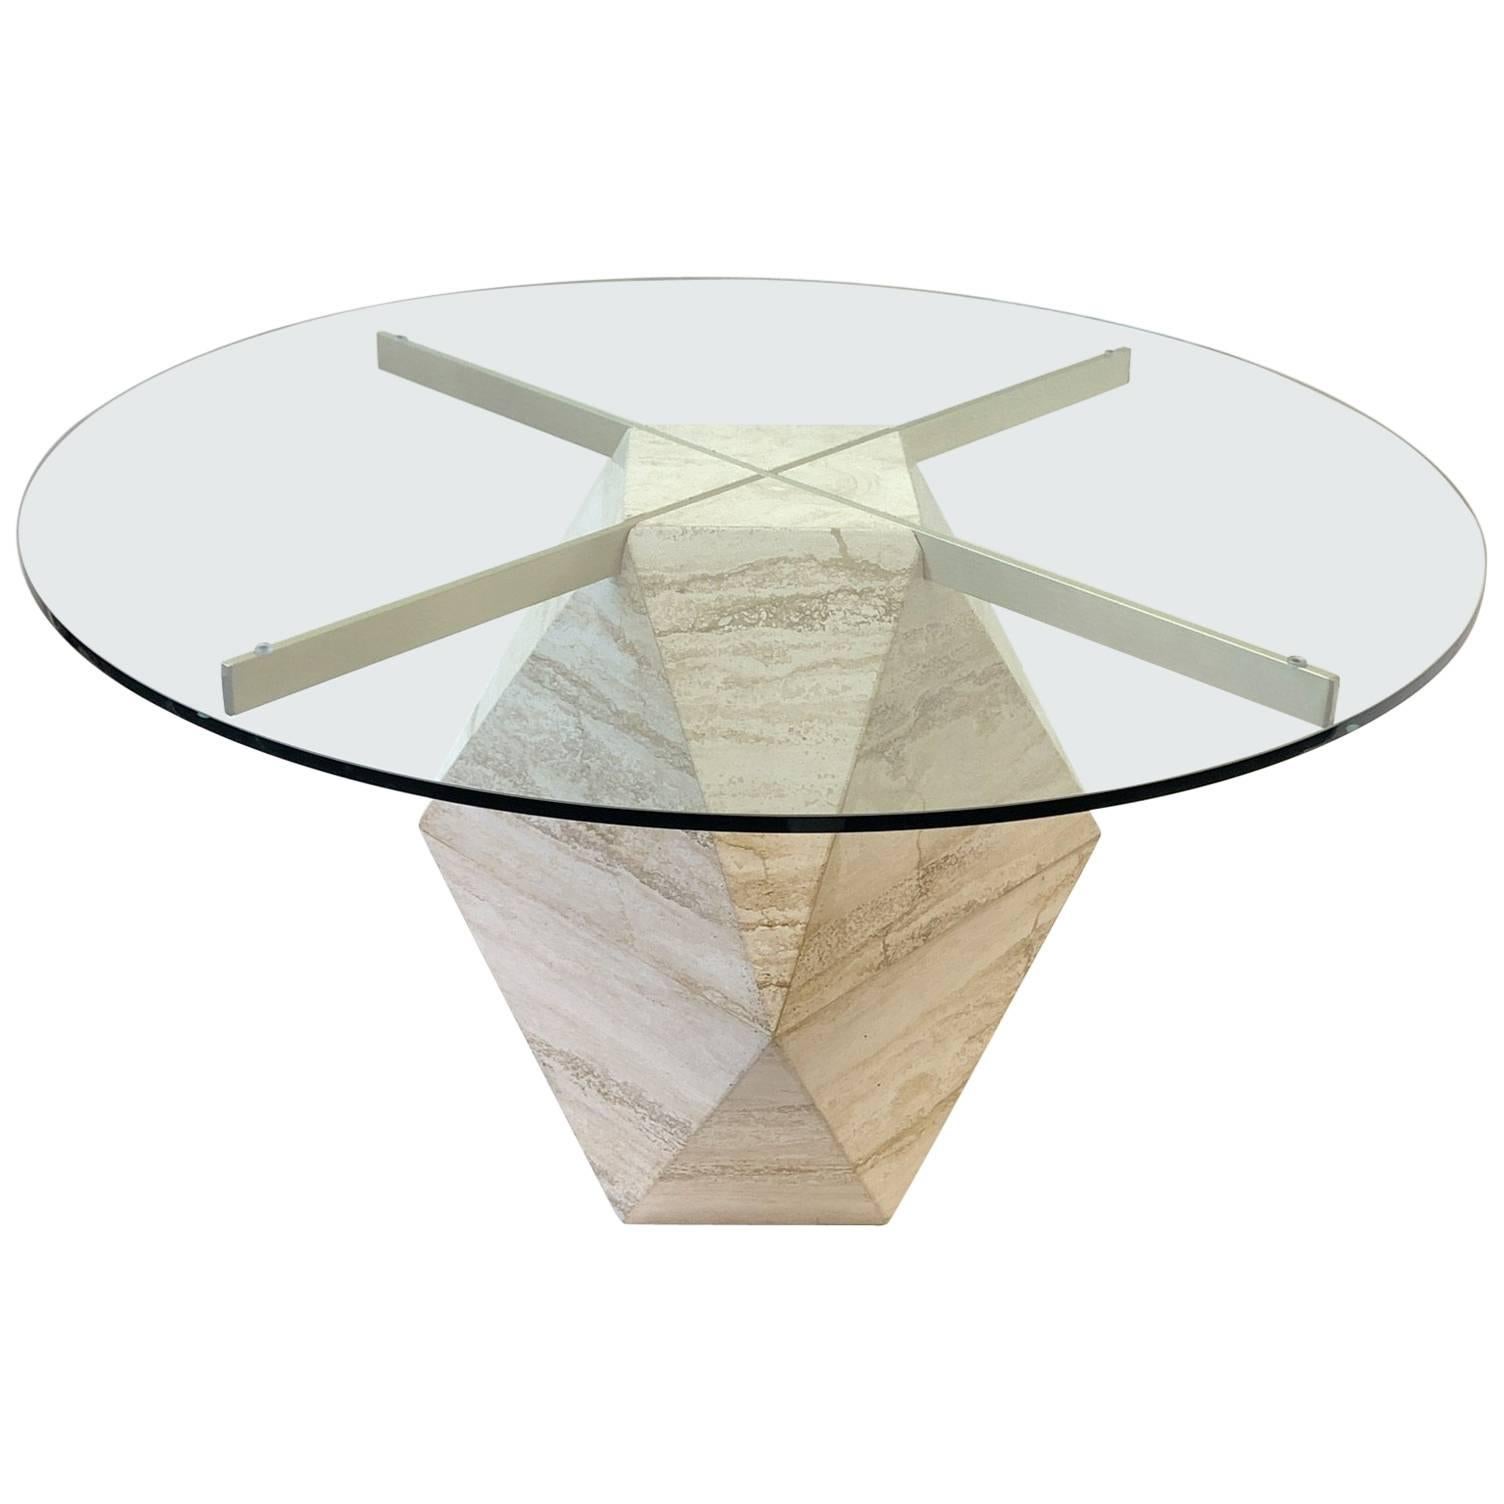 Italian Travertine and Satin Brass Dining Table by Artedi